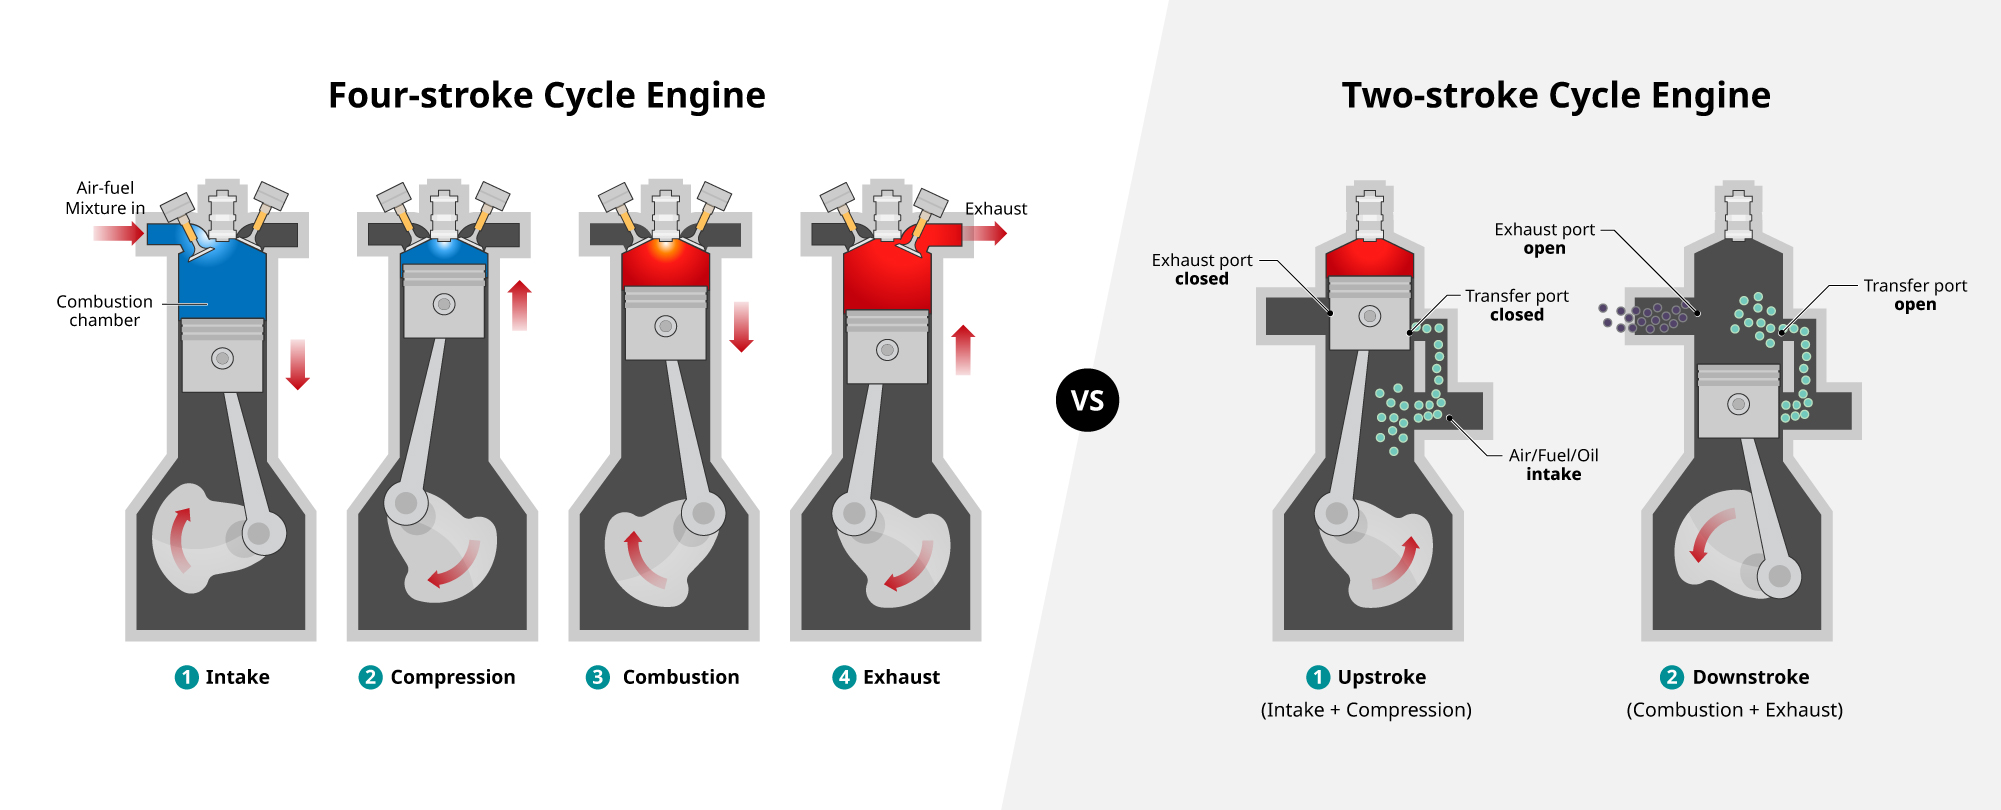 The difference between four-stroke and two-stroke motorcycle engine oils 